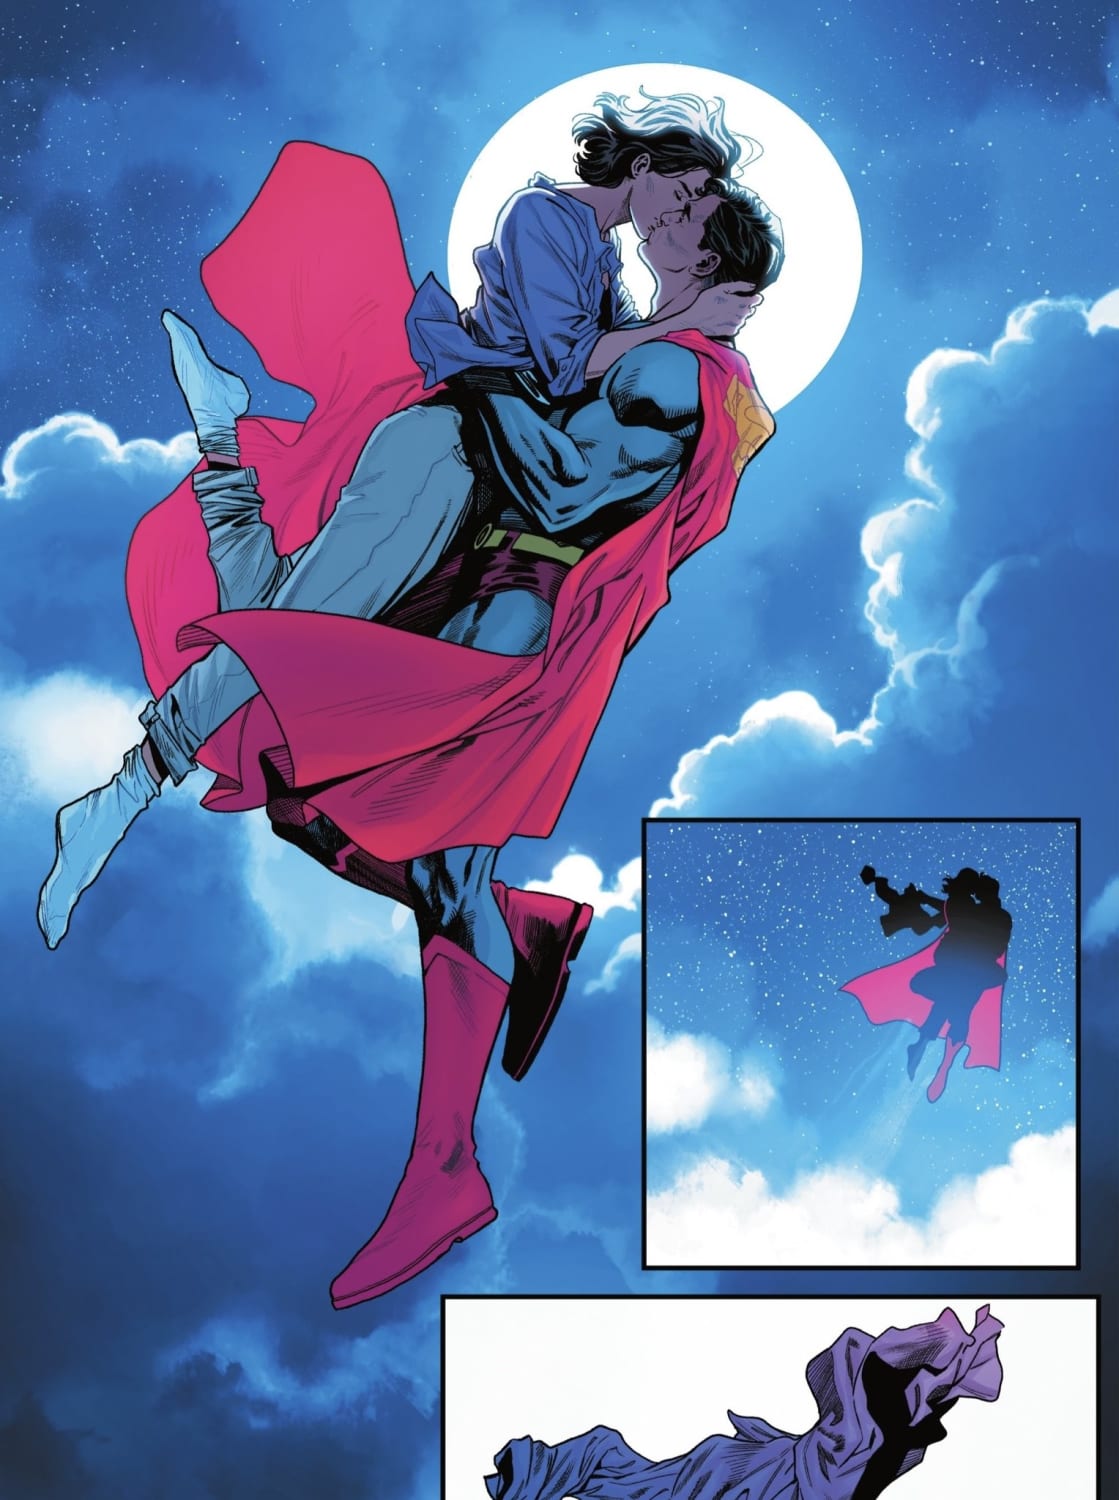 [Excerpt] Superman and Lois sitting in the sky (Action Comics 1035)